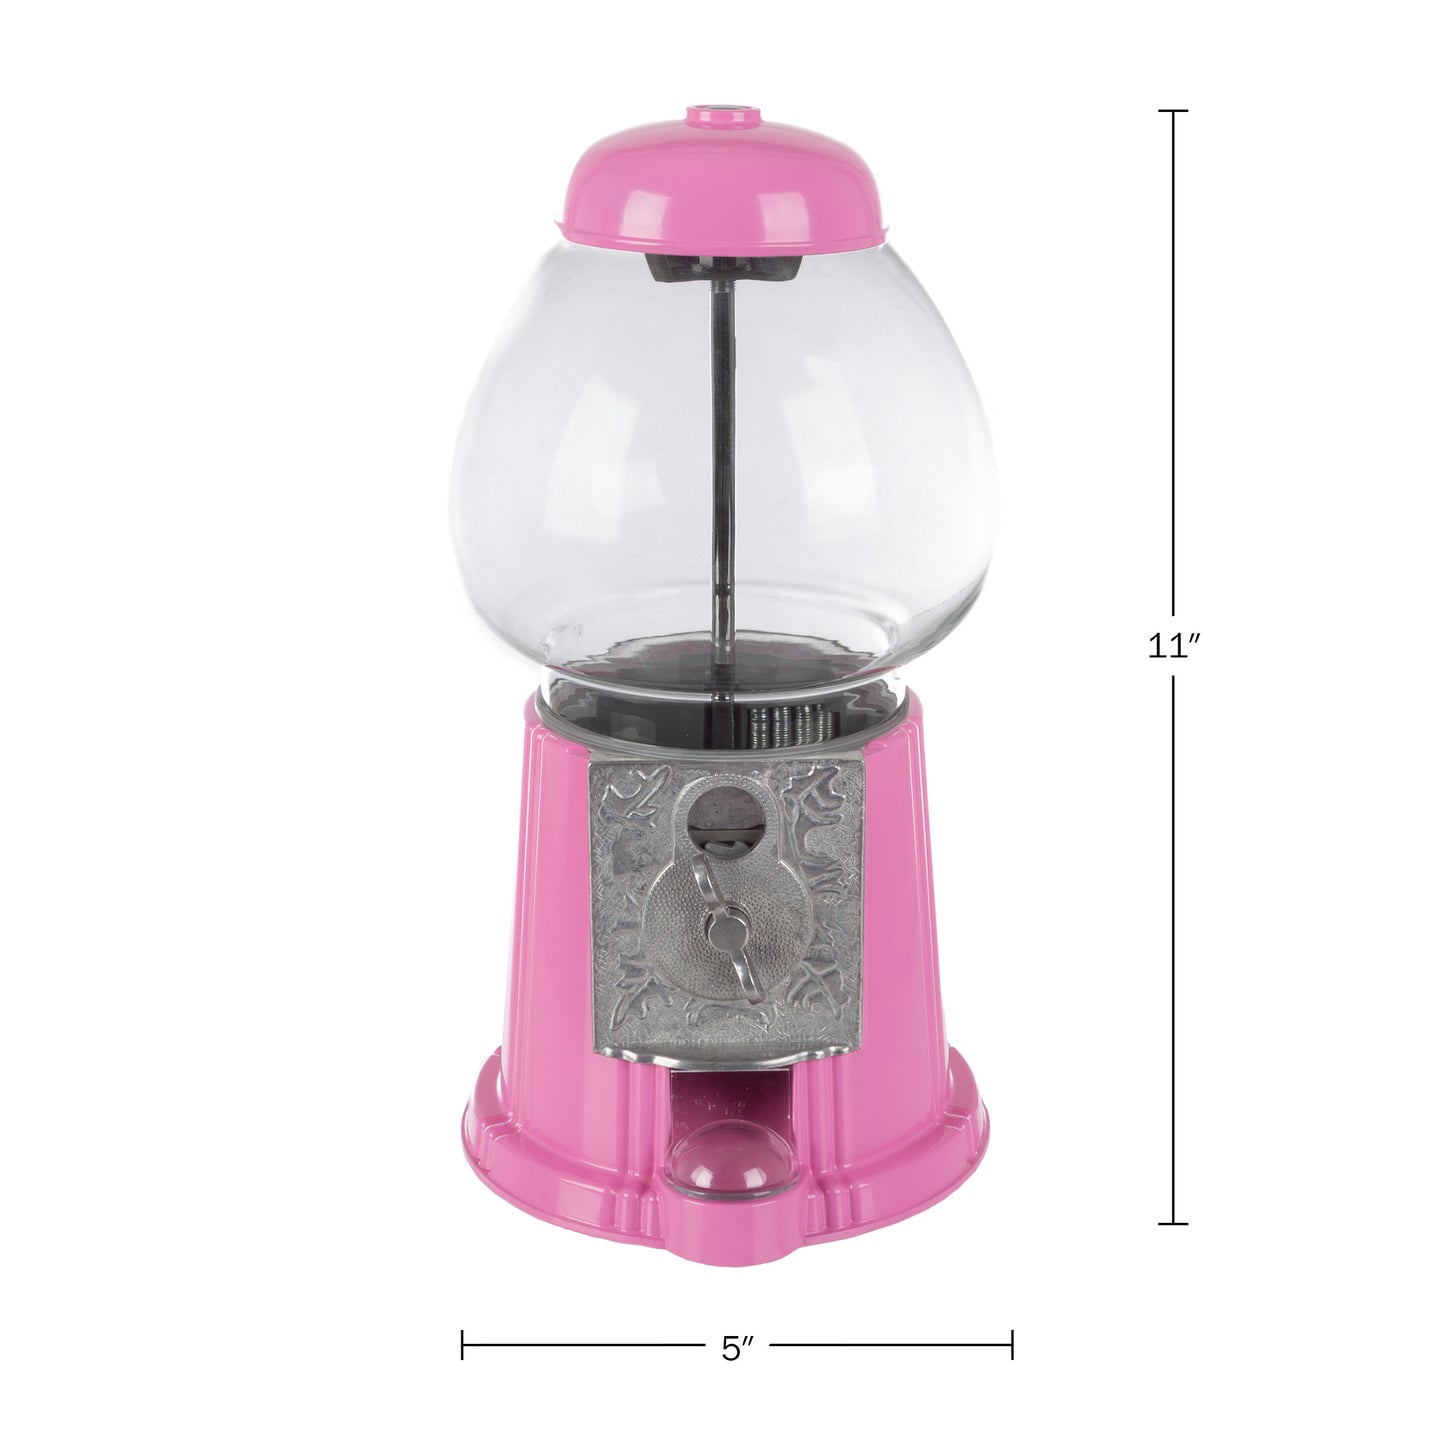 11" Gumball Machine with Coin Bank - Pink